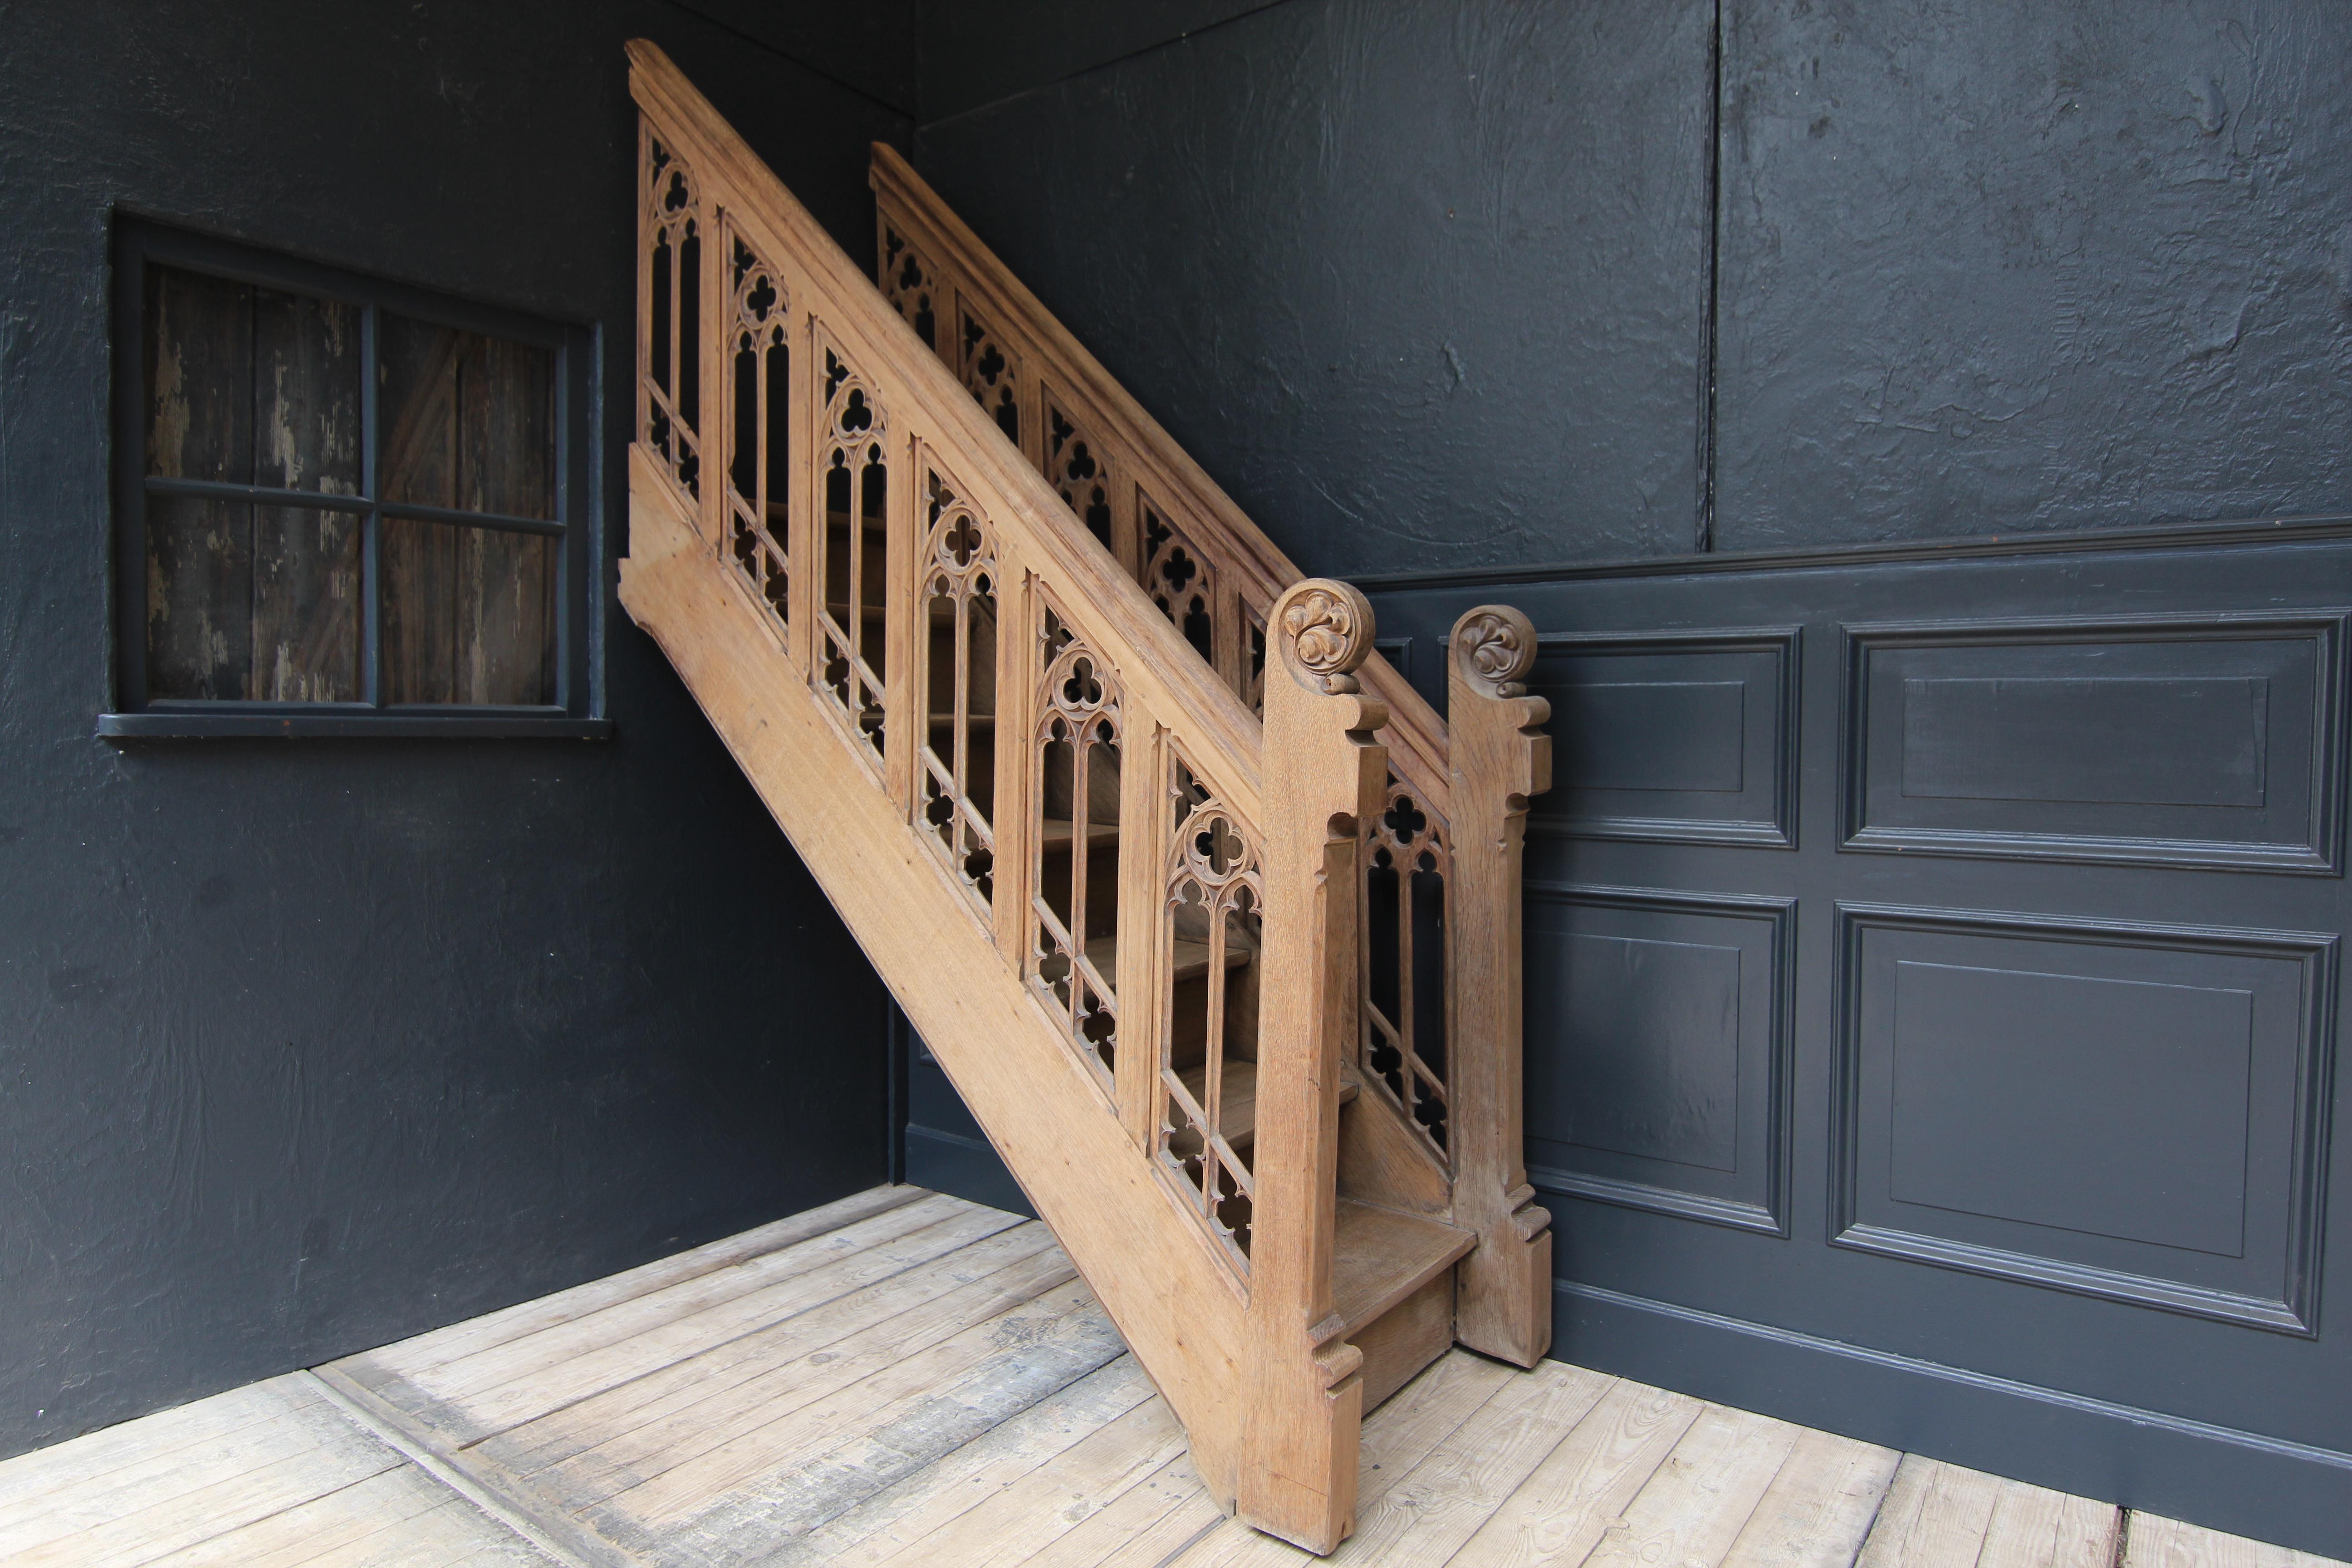 hidden staircase in a 19th century victorian home leading to a secret room.